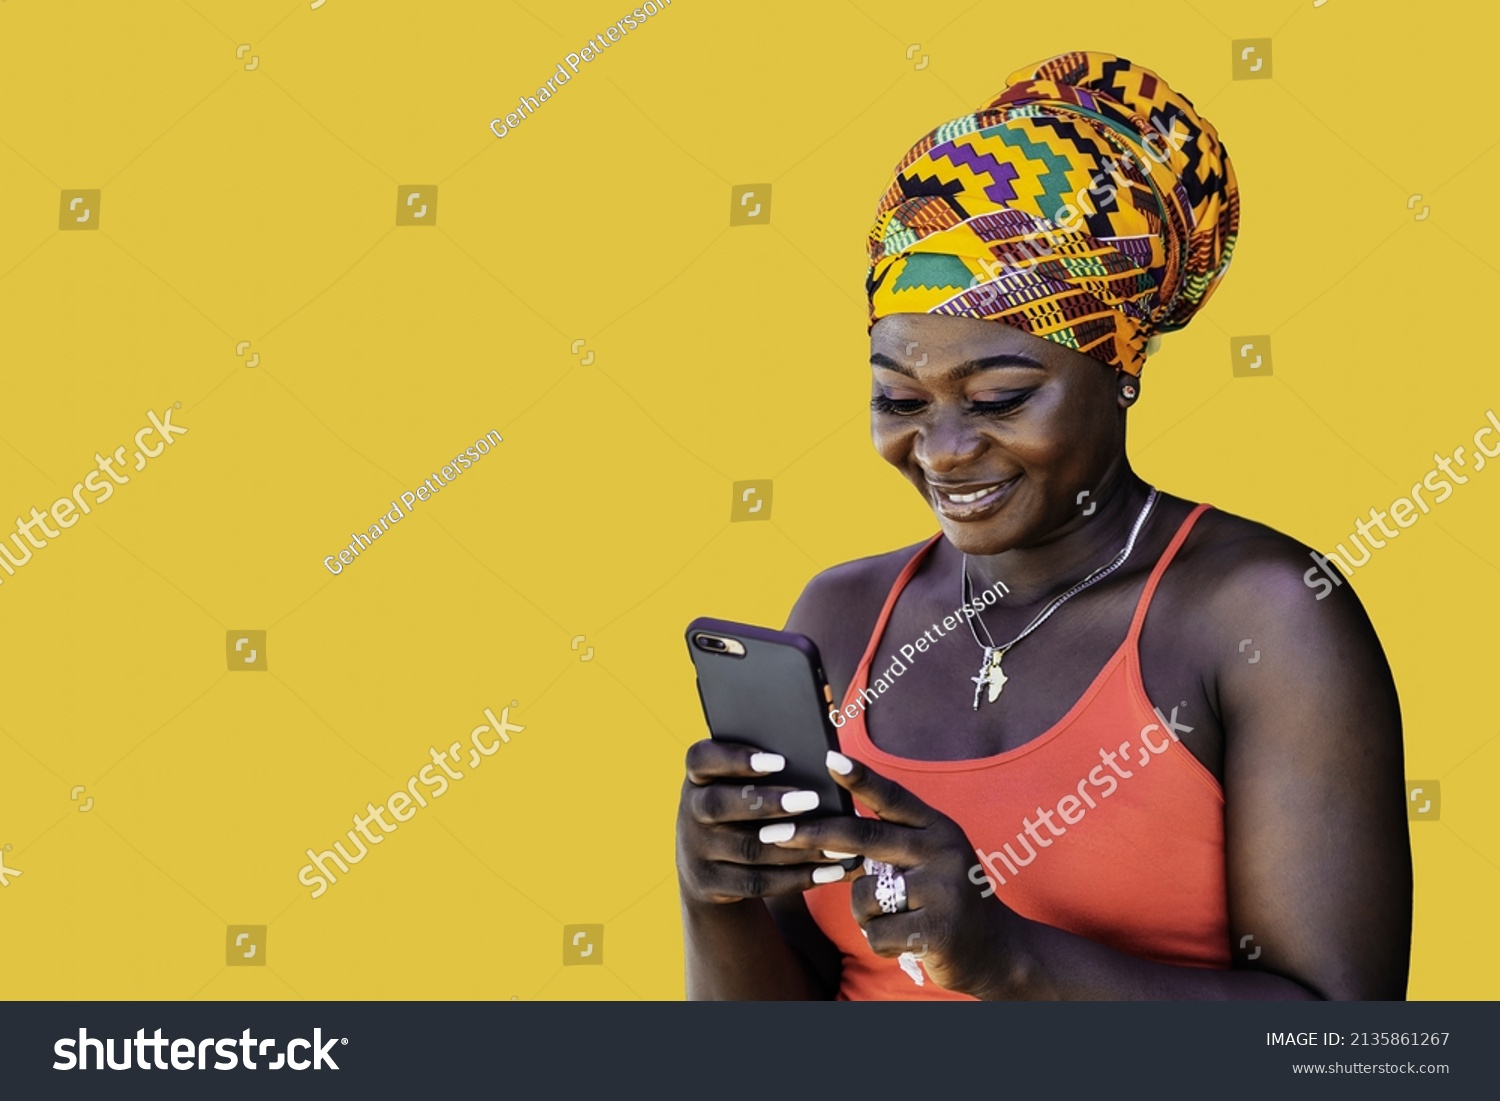 Ghana woman with African colorful headdress standing and chatting with mobile phone, illustrating the wireless technology in today's society #2135861267